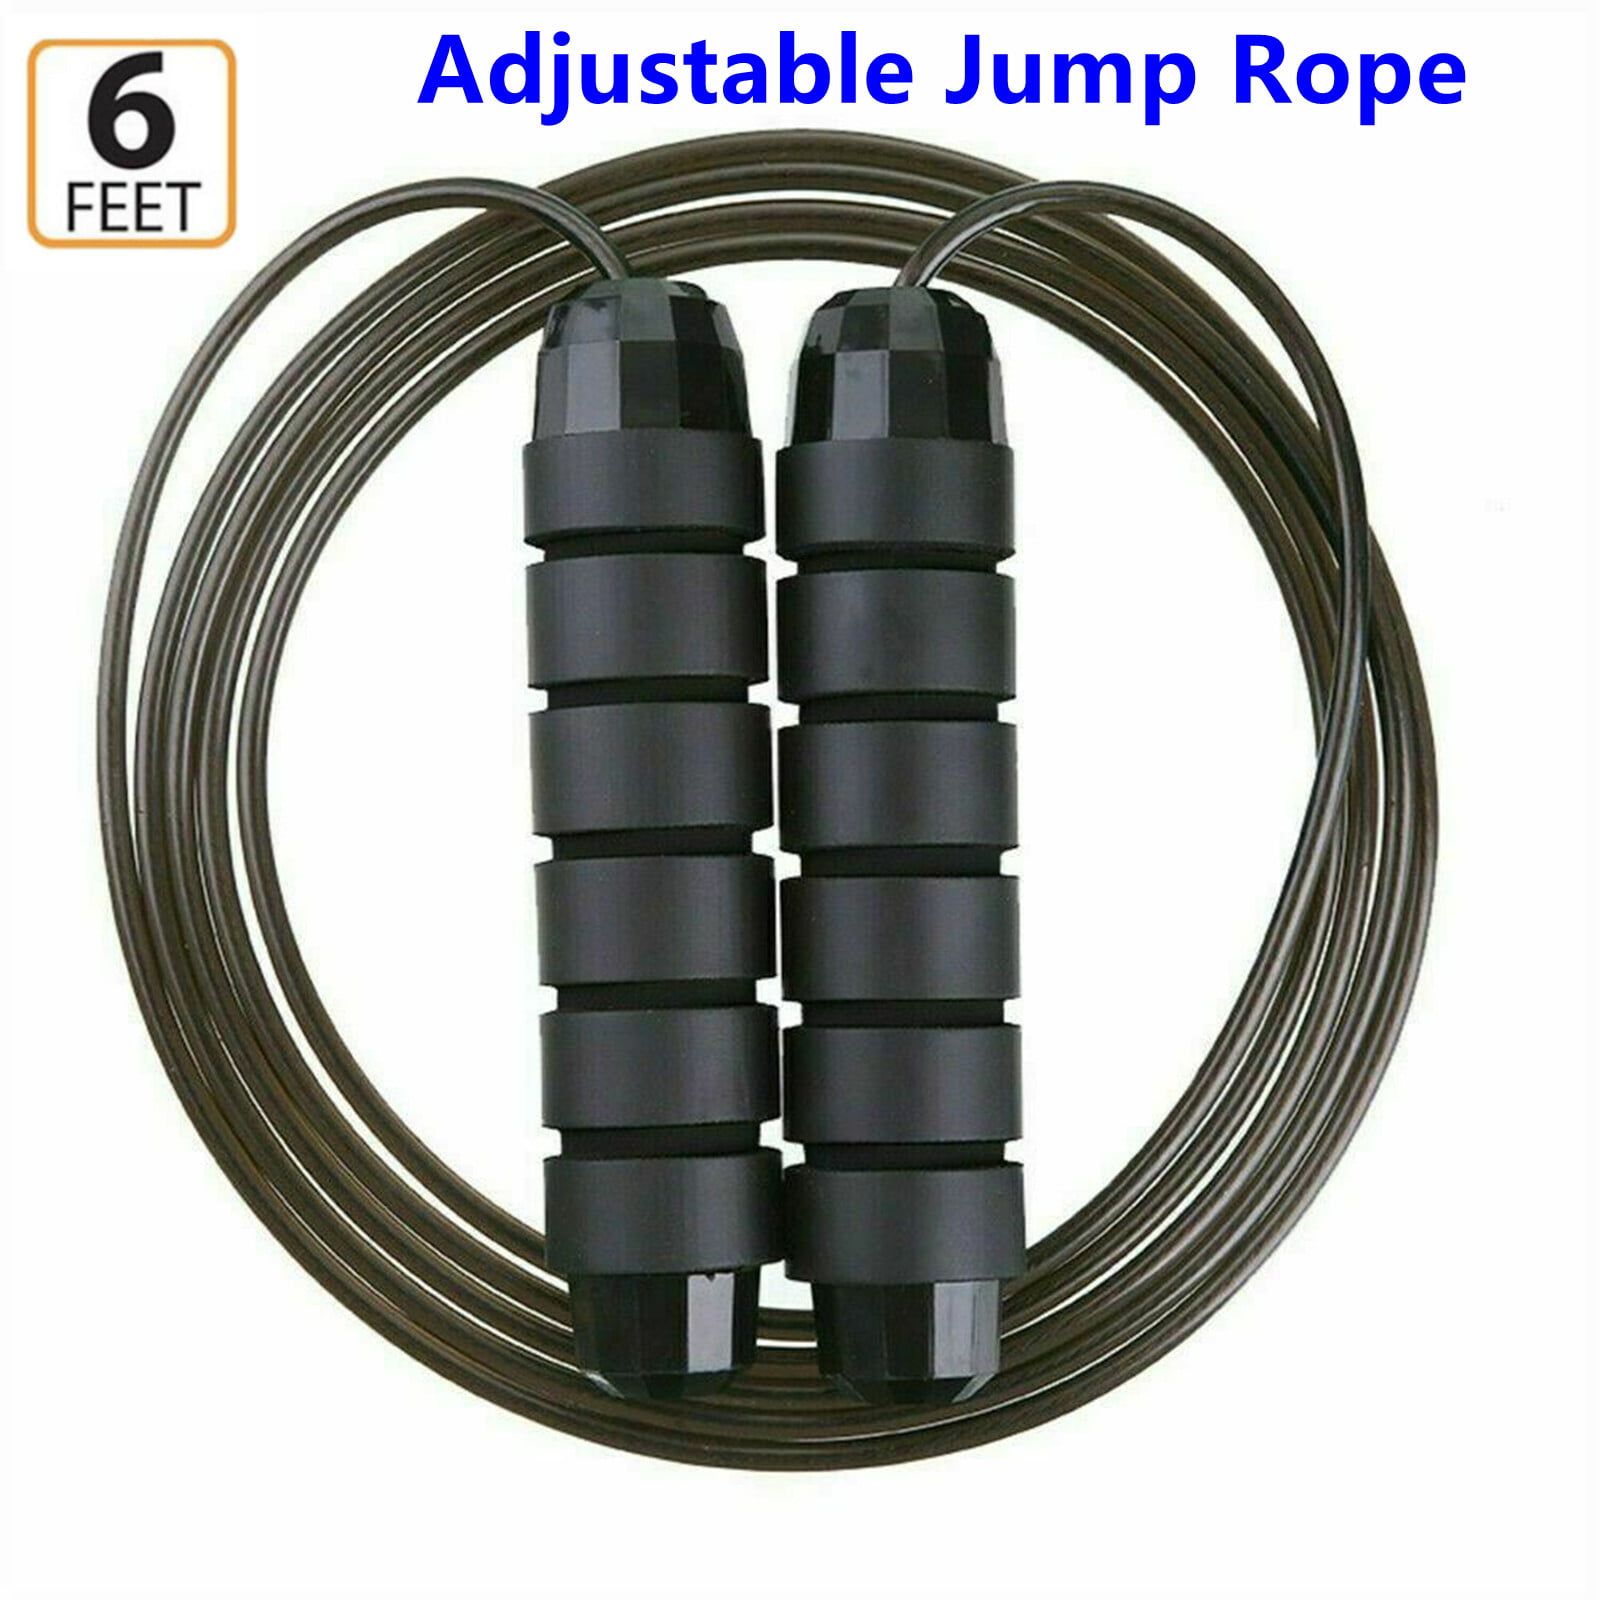 YOGU Jump Rope- Adjustable and Kids Tangle-Free Jumping Rope- Great Cardio and Athletic Workouts for Men Women 